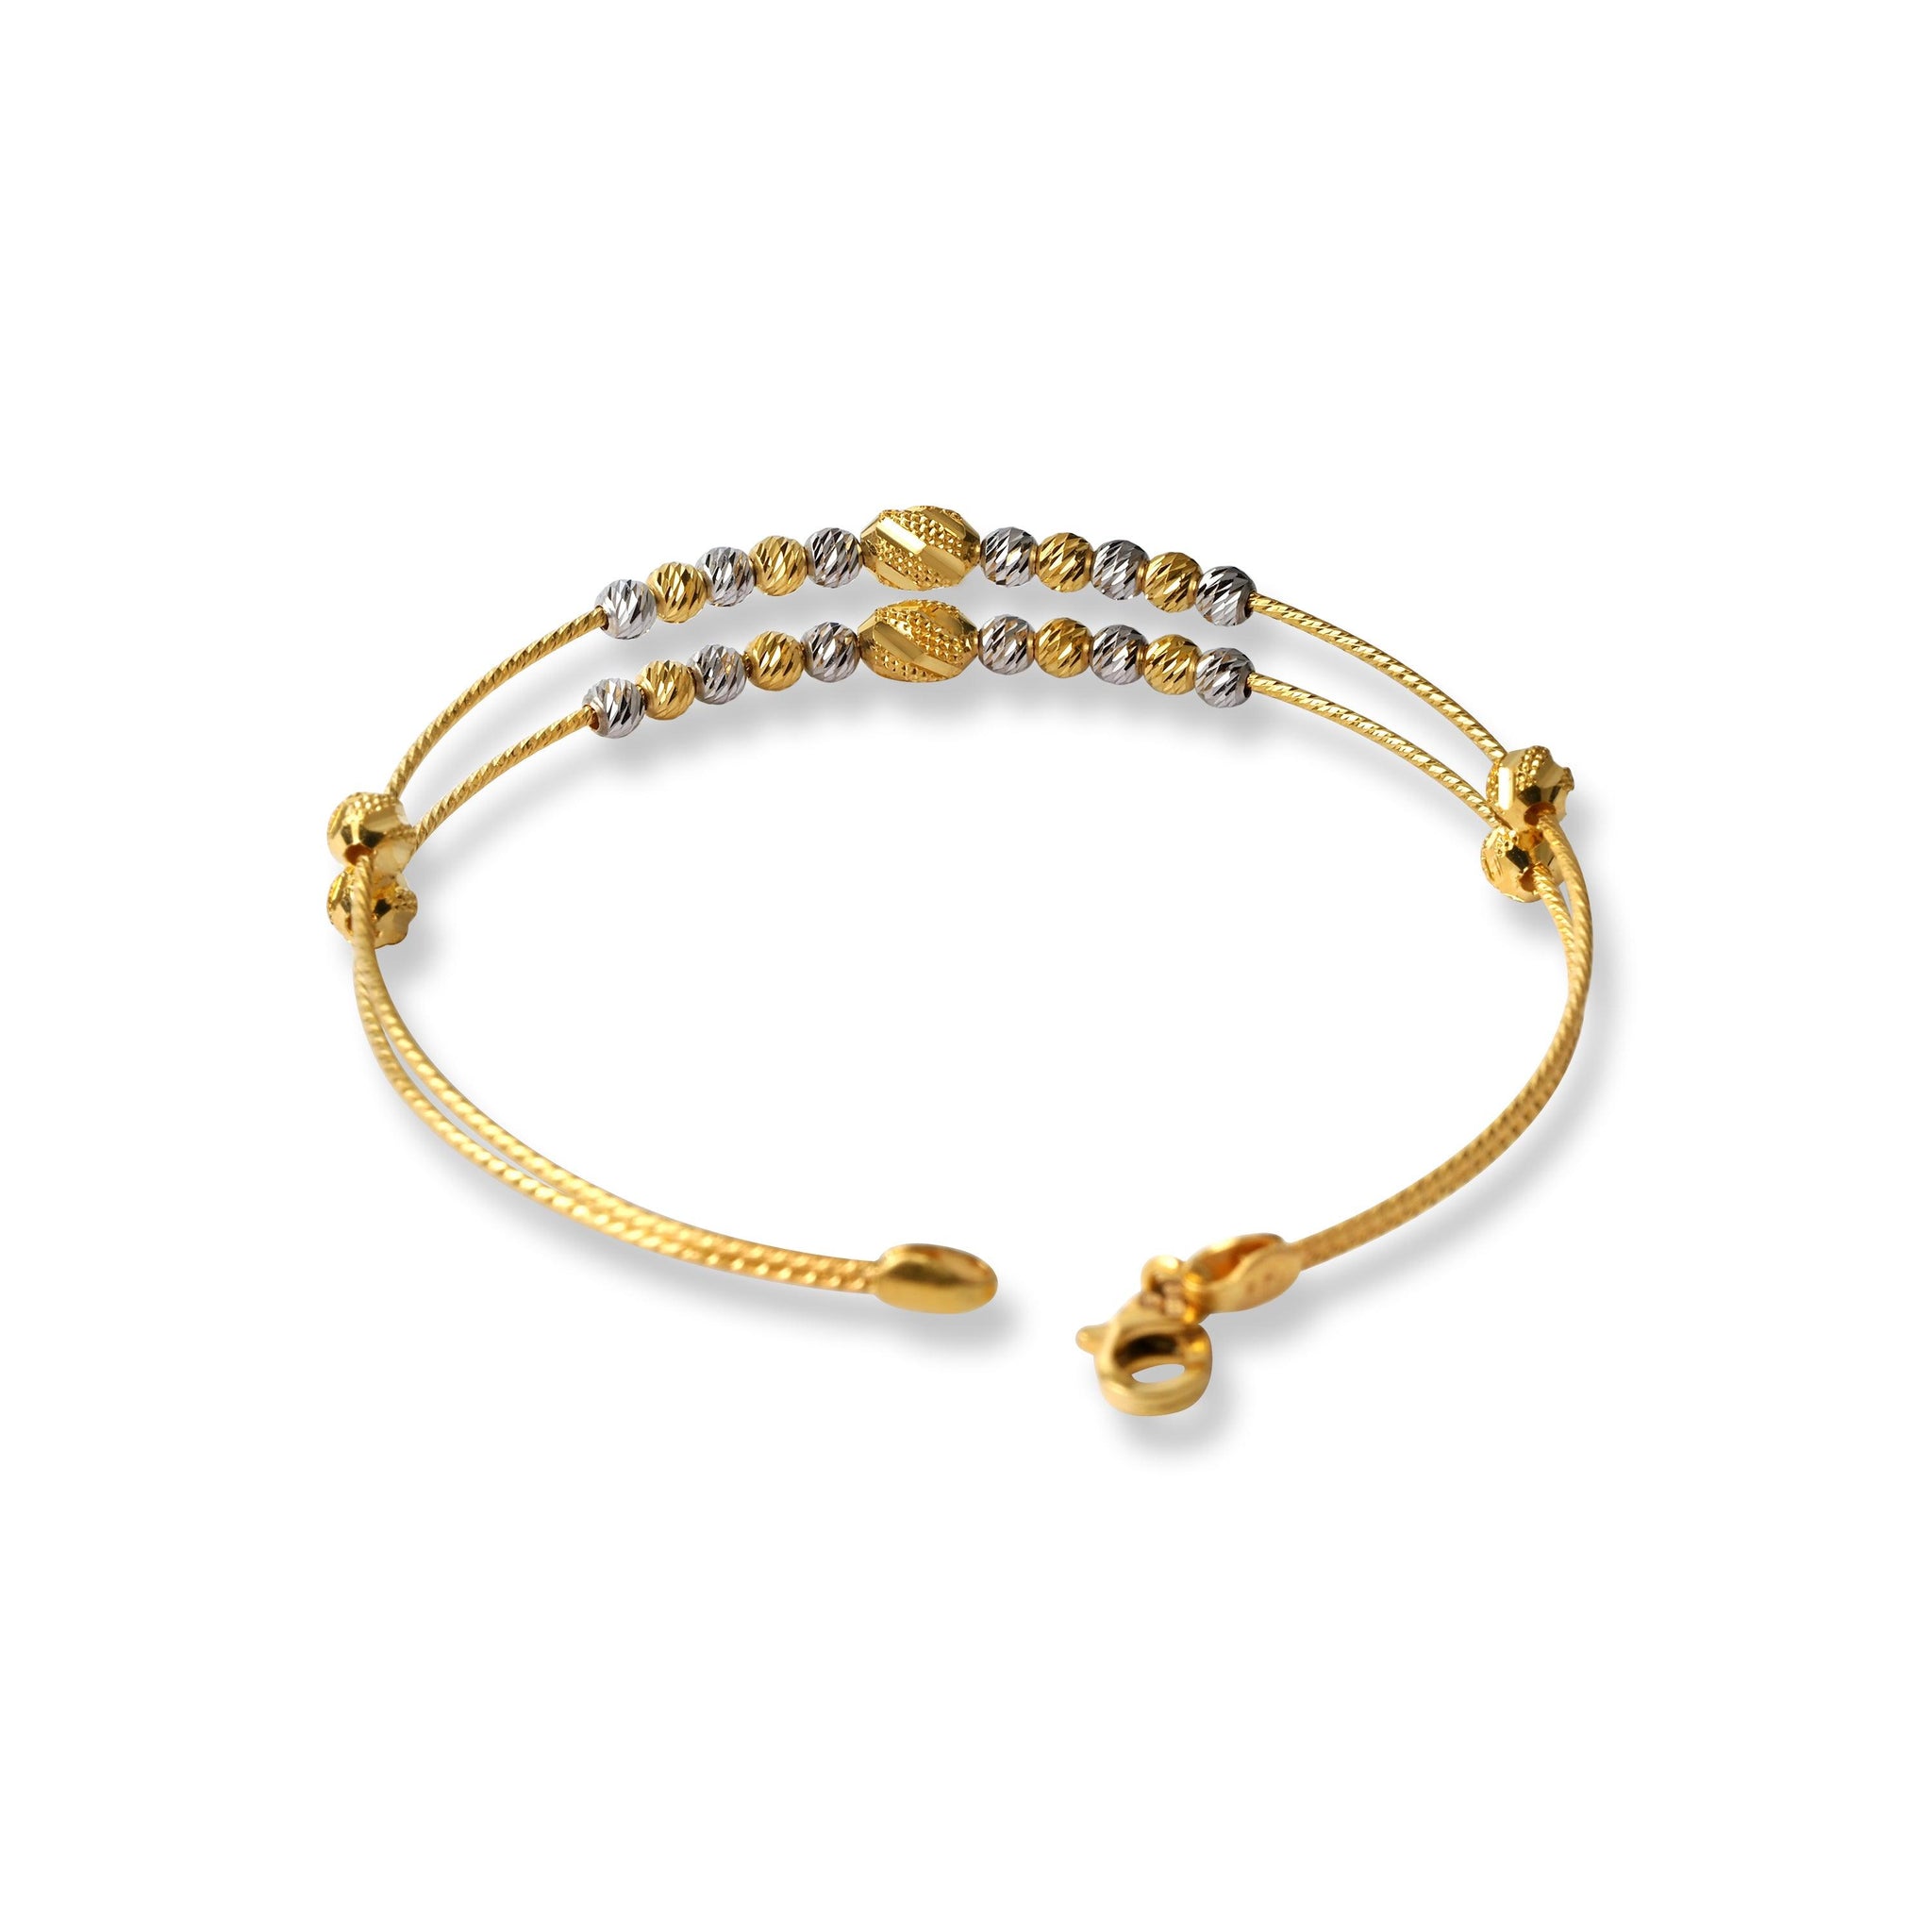 22ct Gold Rhodium Plated Beads Bangle With Rounded Trigger Clasp (7.5g) B-8442